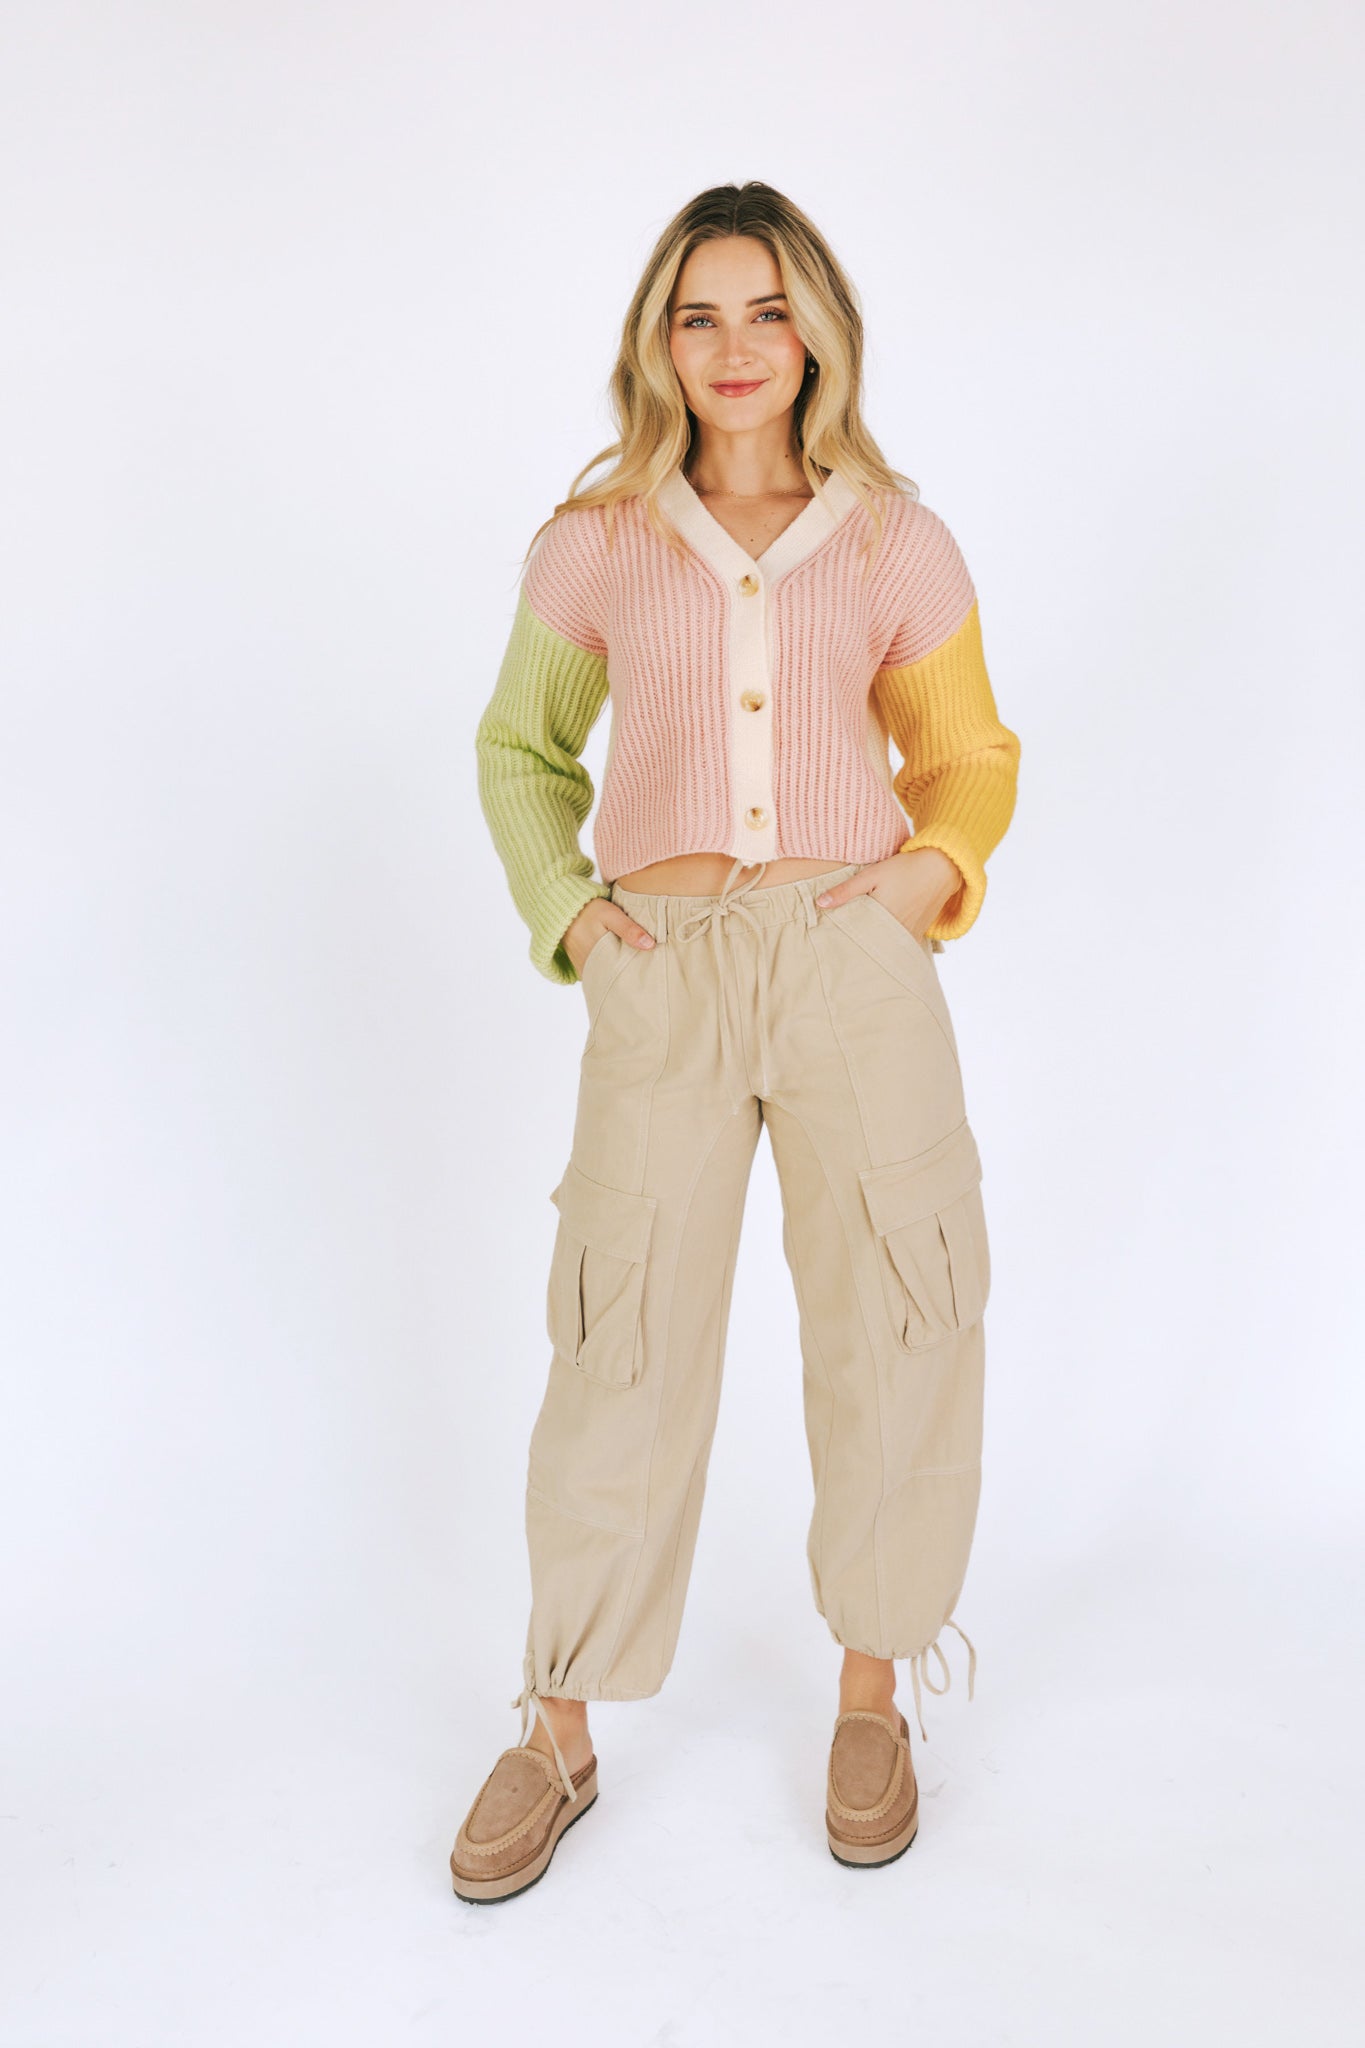 Vintage Shirt and Yellow Trousers + Style With a Smile Link Up - Style  Splash